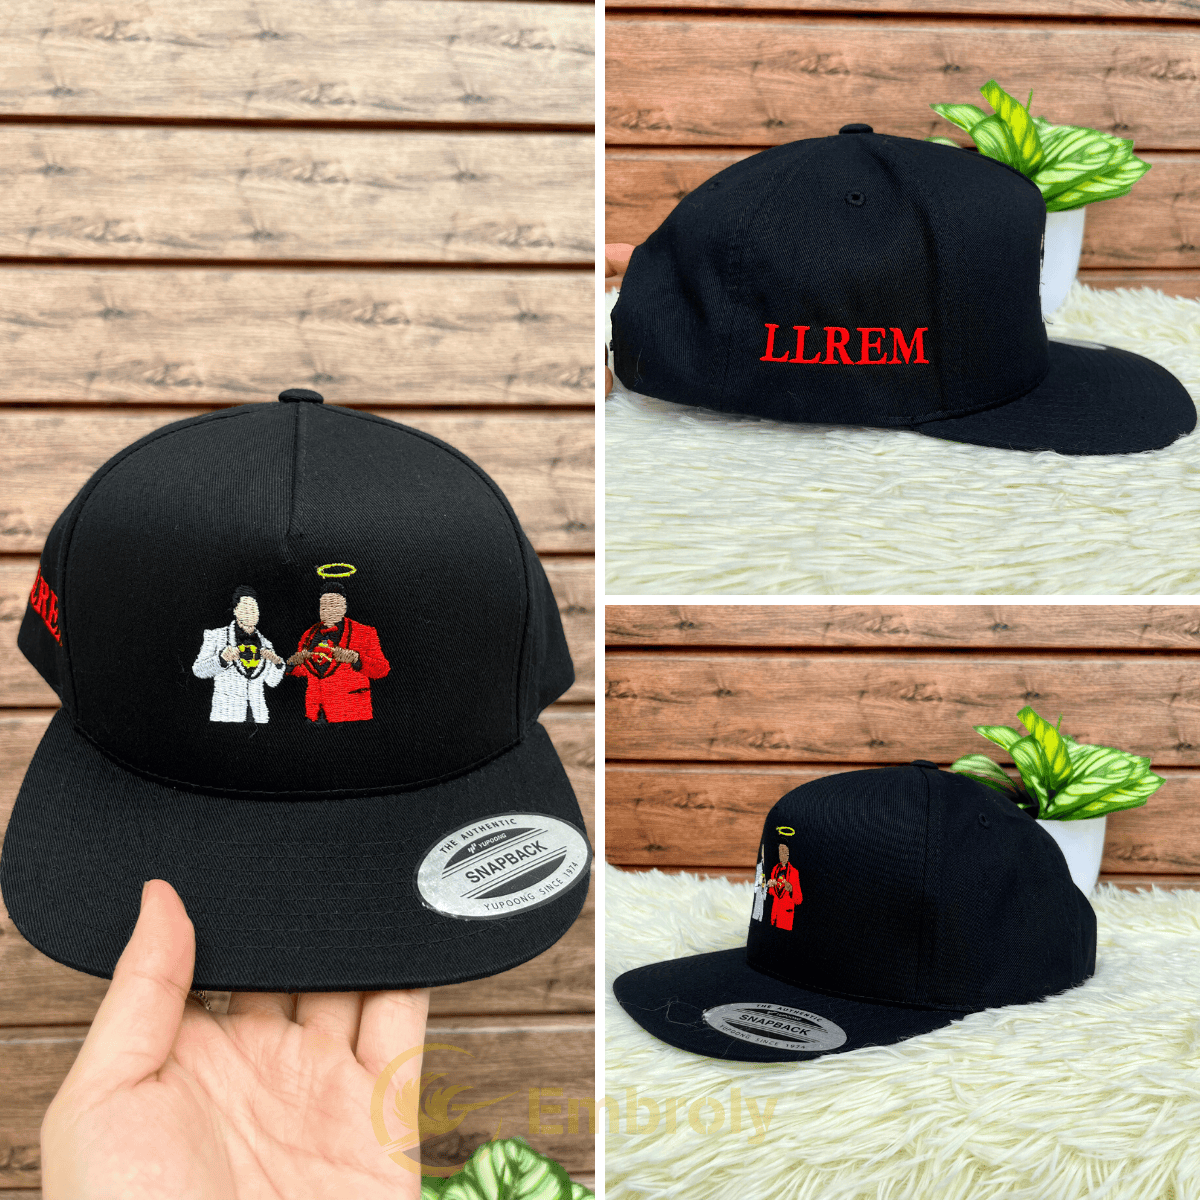 Personalized Hat With Photo Embroidery Design, Anniversary Gift For Friend  Couple, Customize Snapback Hat With Date On Side - Embroly